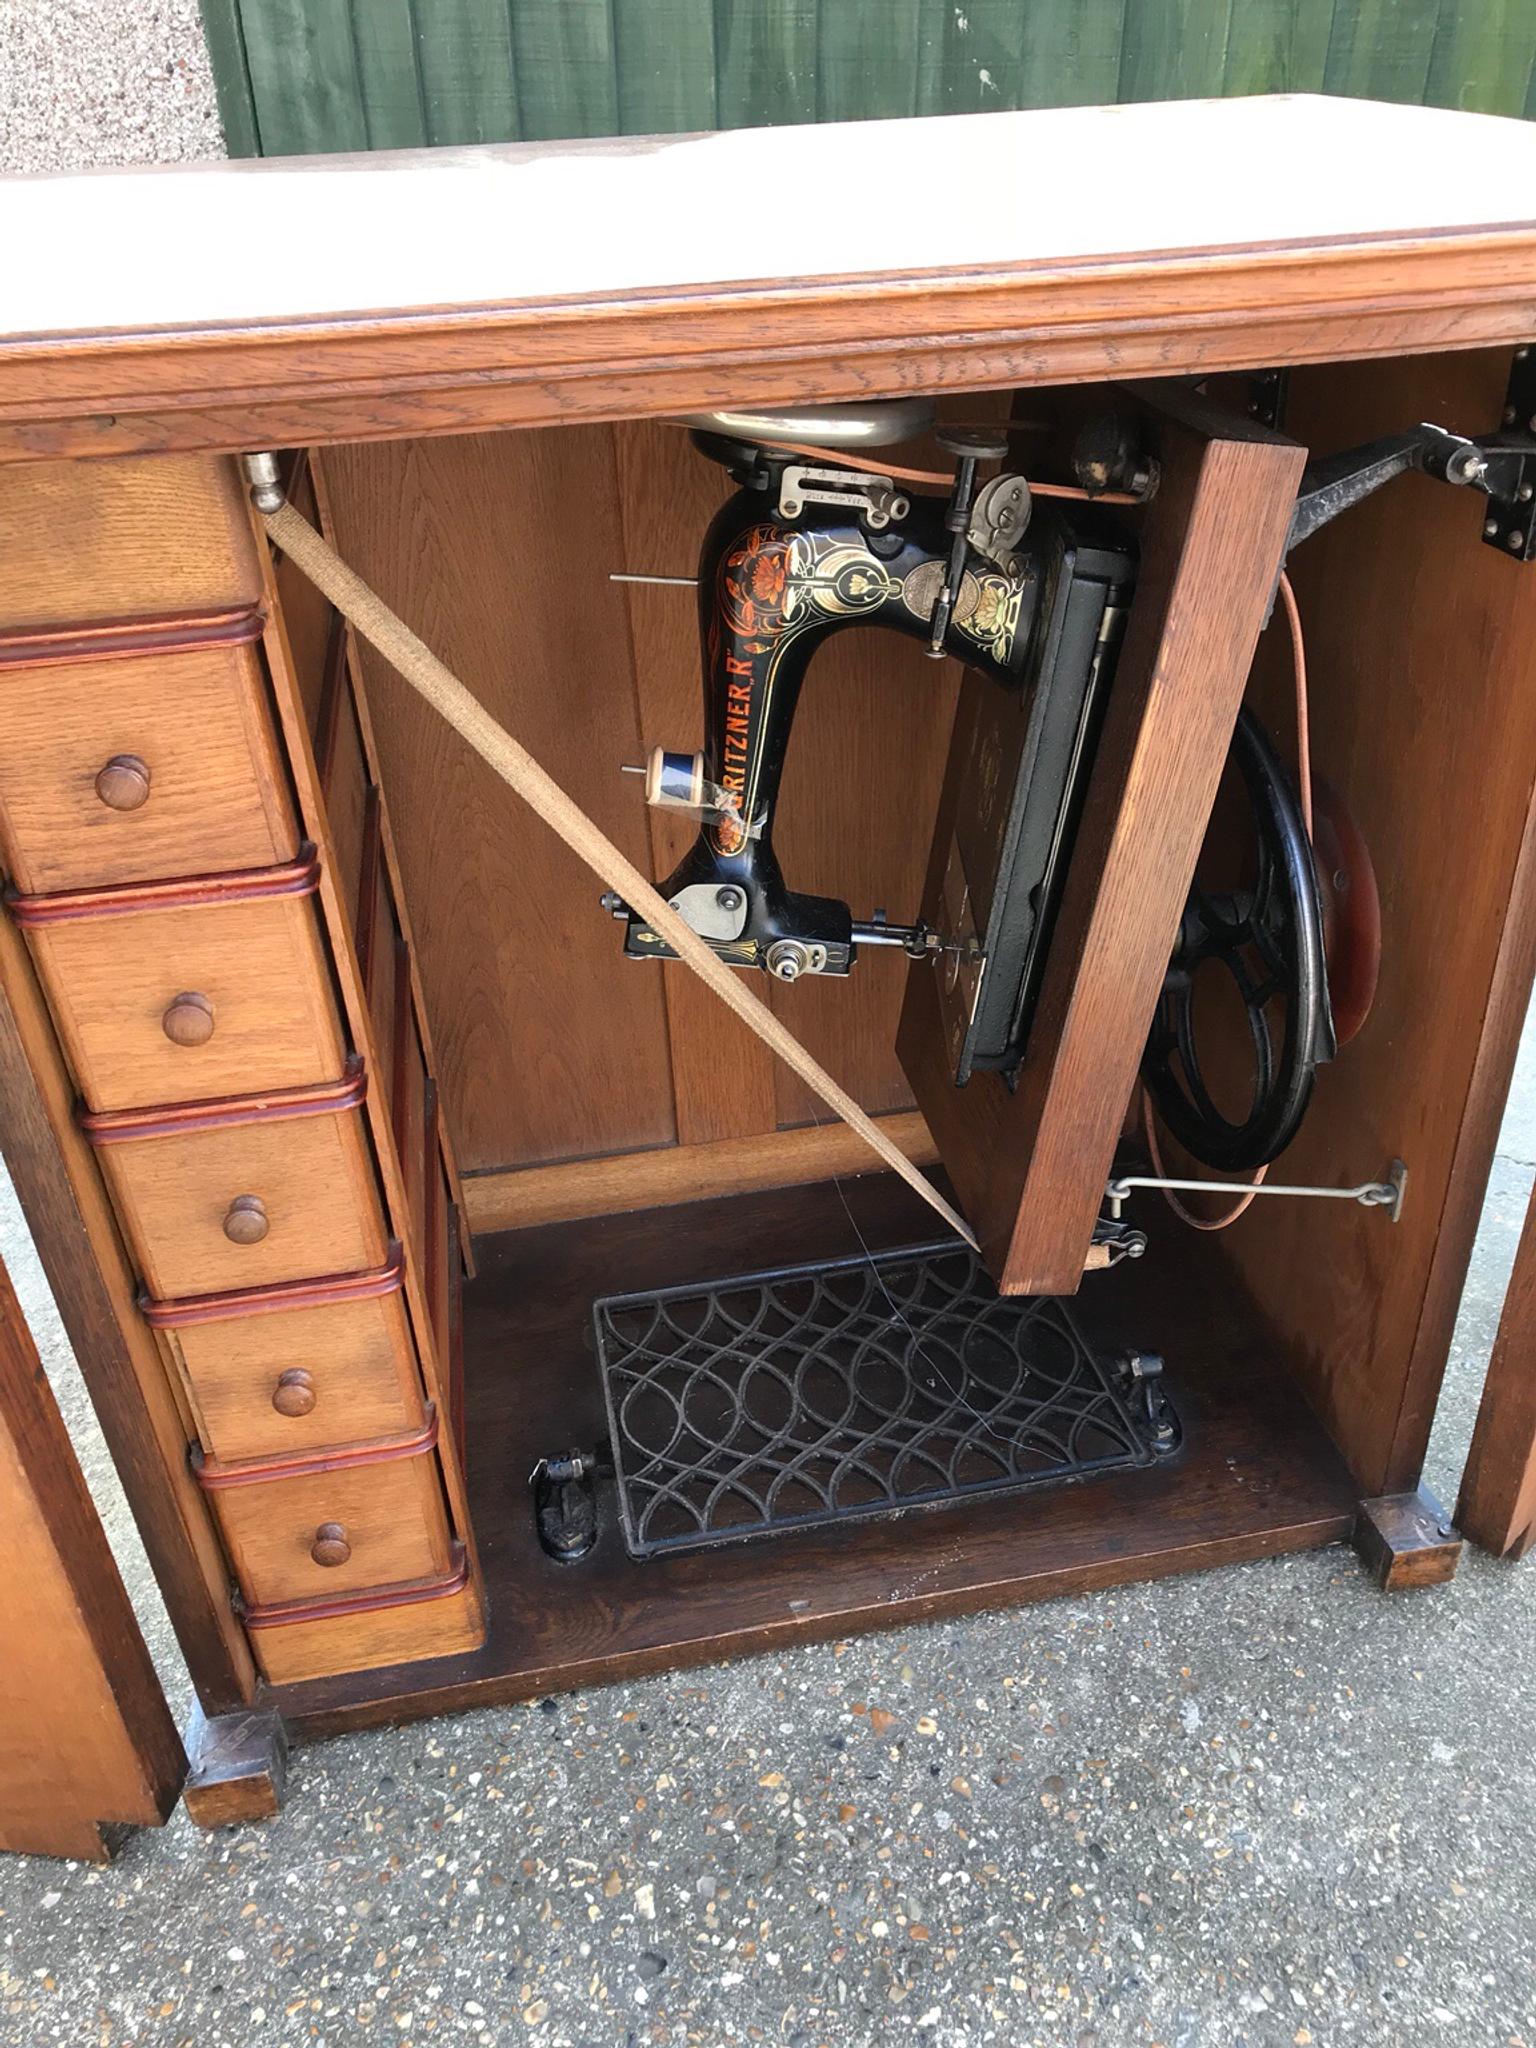 Gritzner Cabinet Treadle Sewing Machine In Rm15 London Borough Of